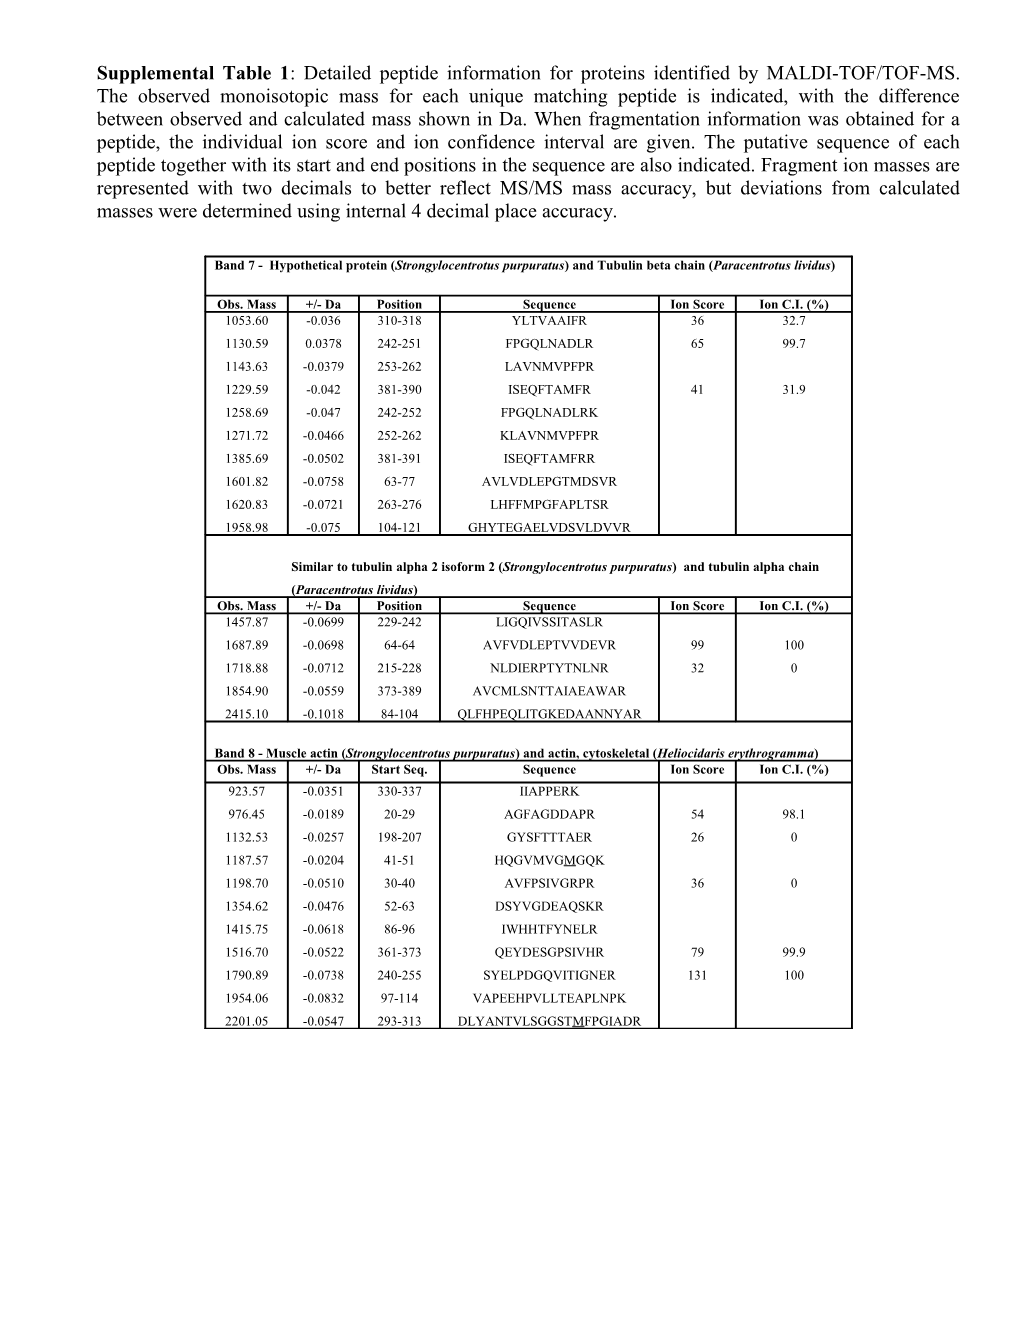 Supplemental Table 1: Detailed Peptide Information for Proteins Identified by MALDI-TOF/TOF-MS